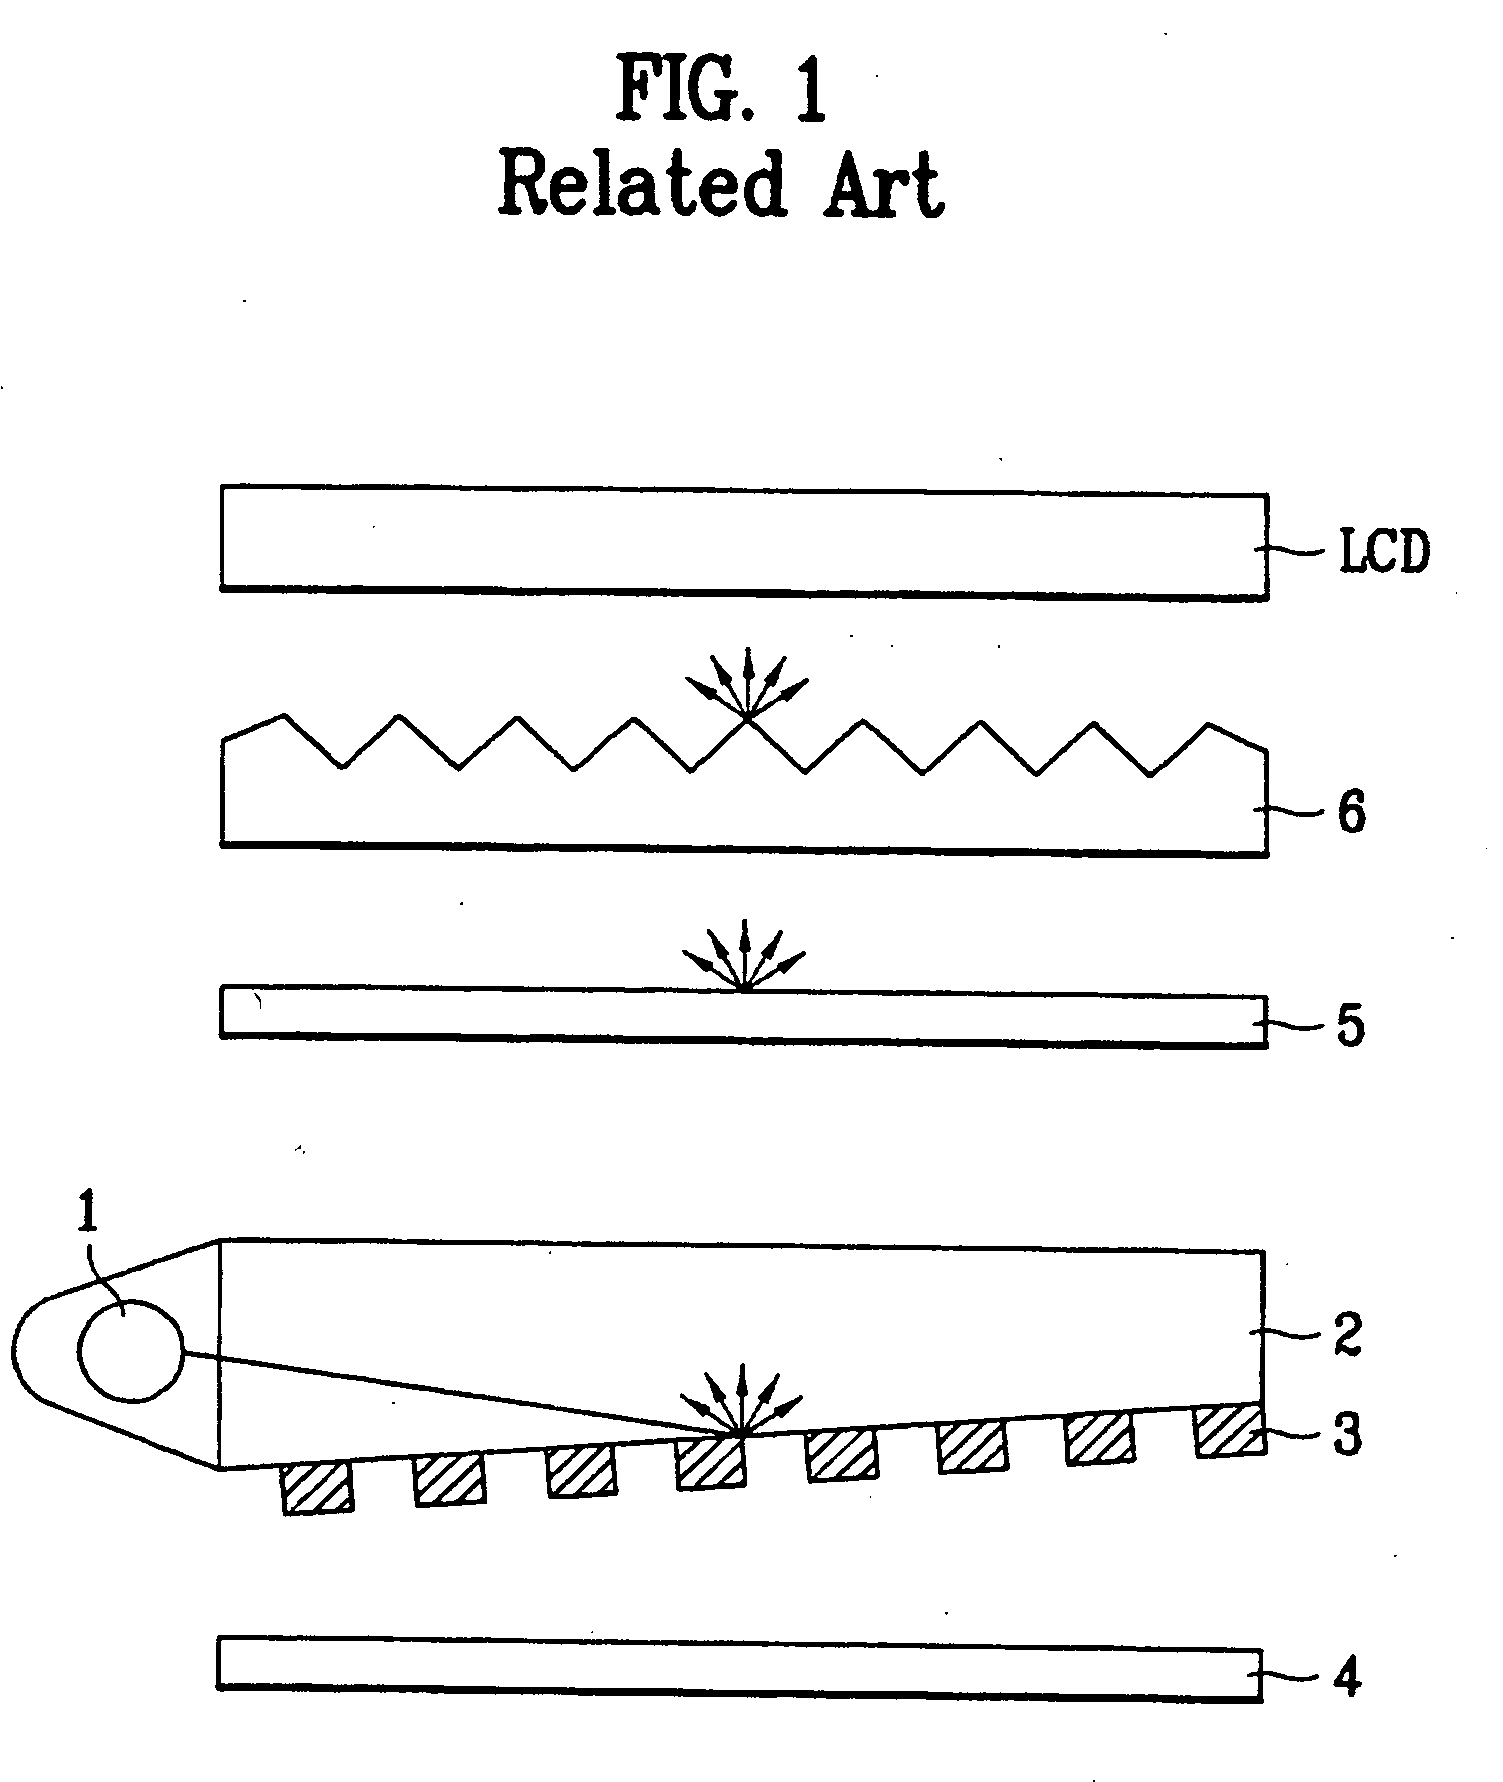 Backlight device for liquid crystal display and method of fabricating the same